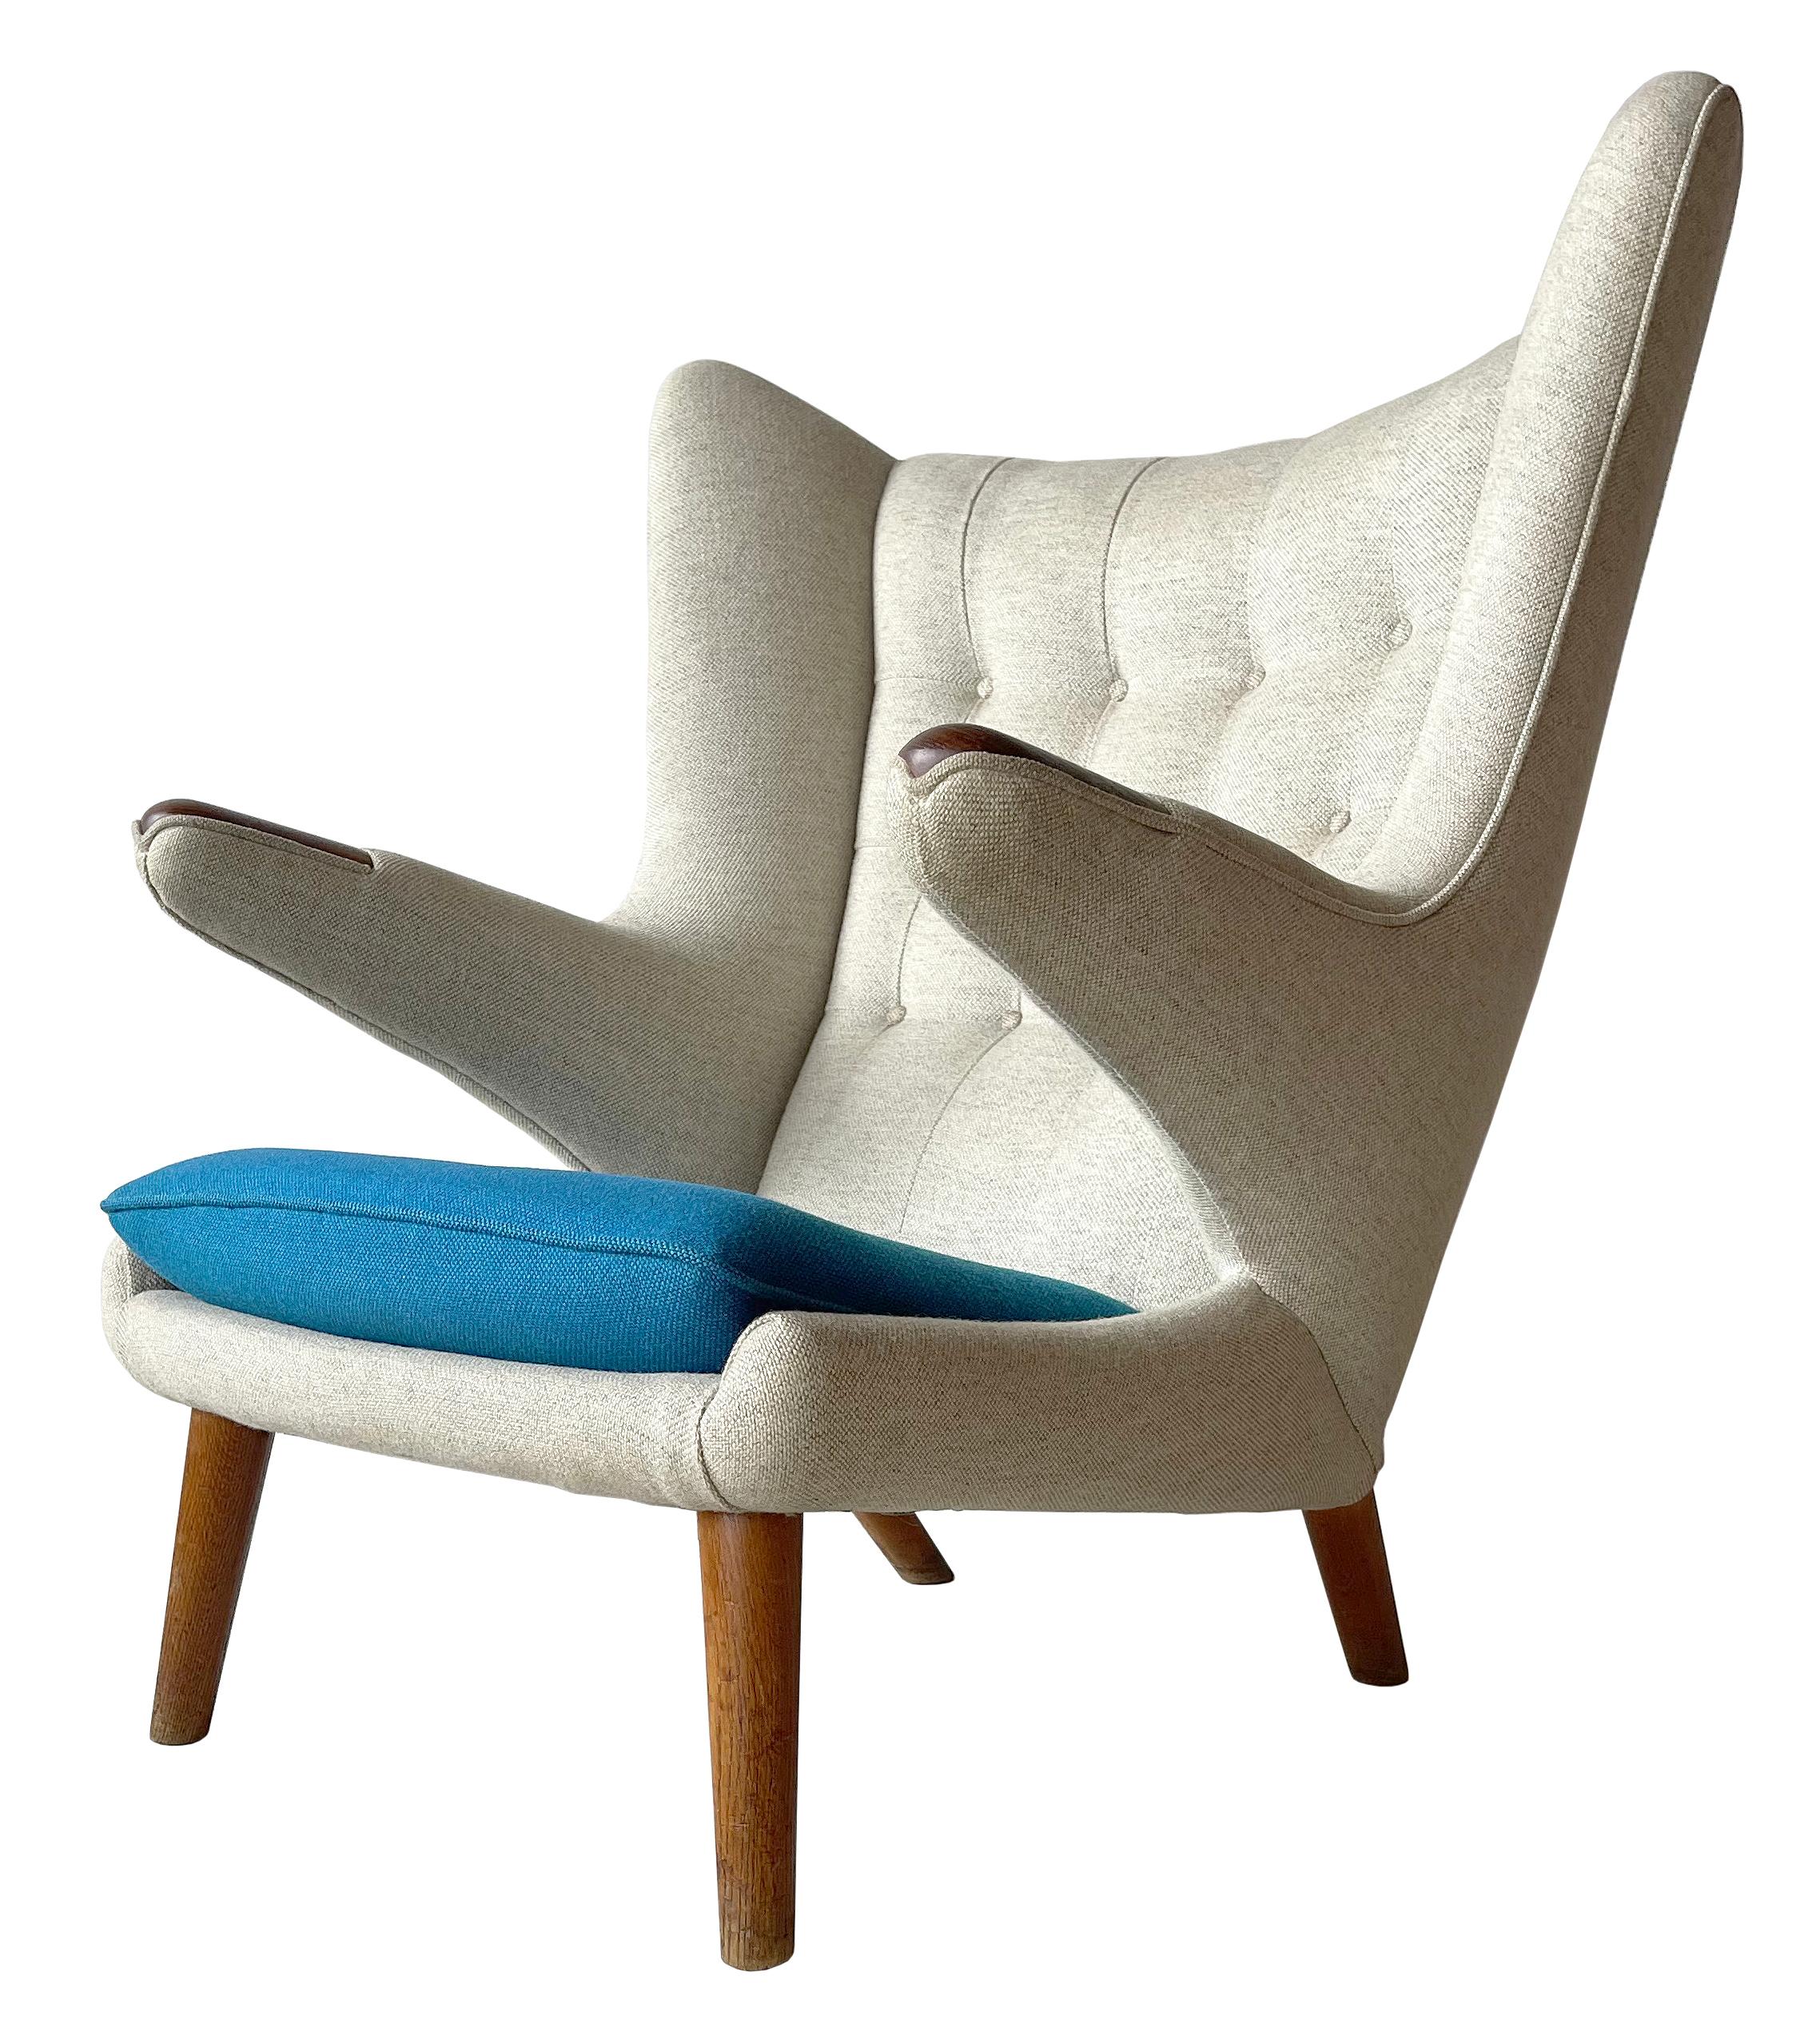 A rare opportunity to purchase a matching set of Hans Wegner's most iconic and celebrated chairs. 
The 